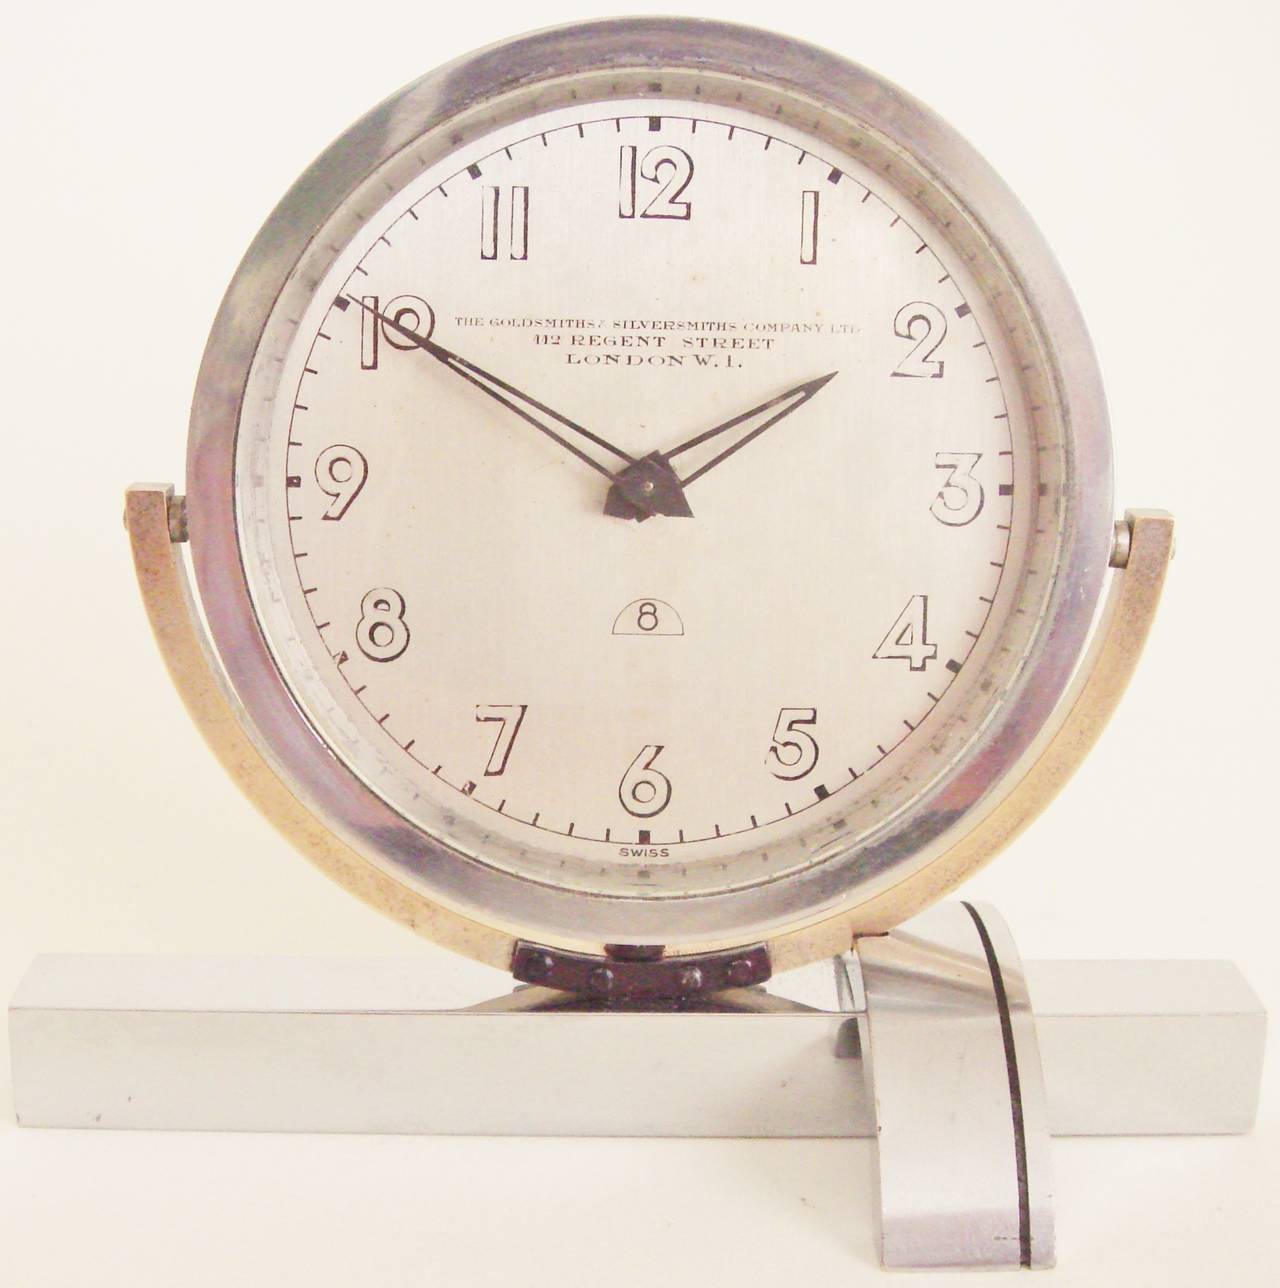 This high-end English Art Deco asymmetrical chrome and brass 8-day mechanical shelf clock has a 15 jewel Swiss movement and on the face bears the London mark of The Goldsmiths and Silversmiths Company Ltd. of 112 Regent Street. The design is